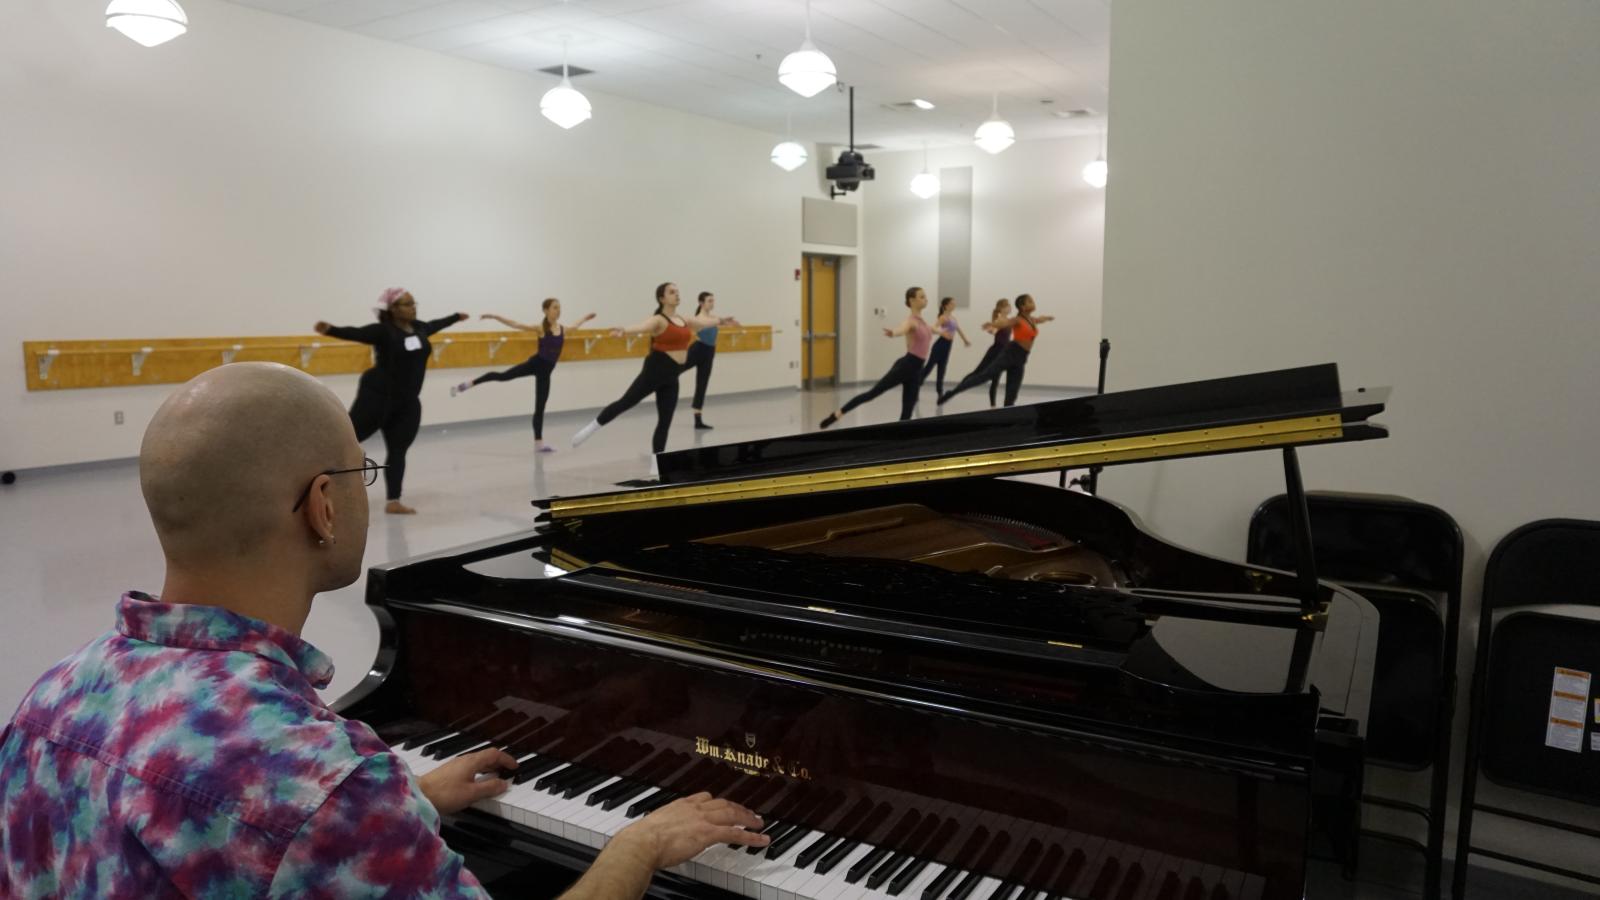 Accompanist playing piano while dancers rehearse in studio